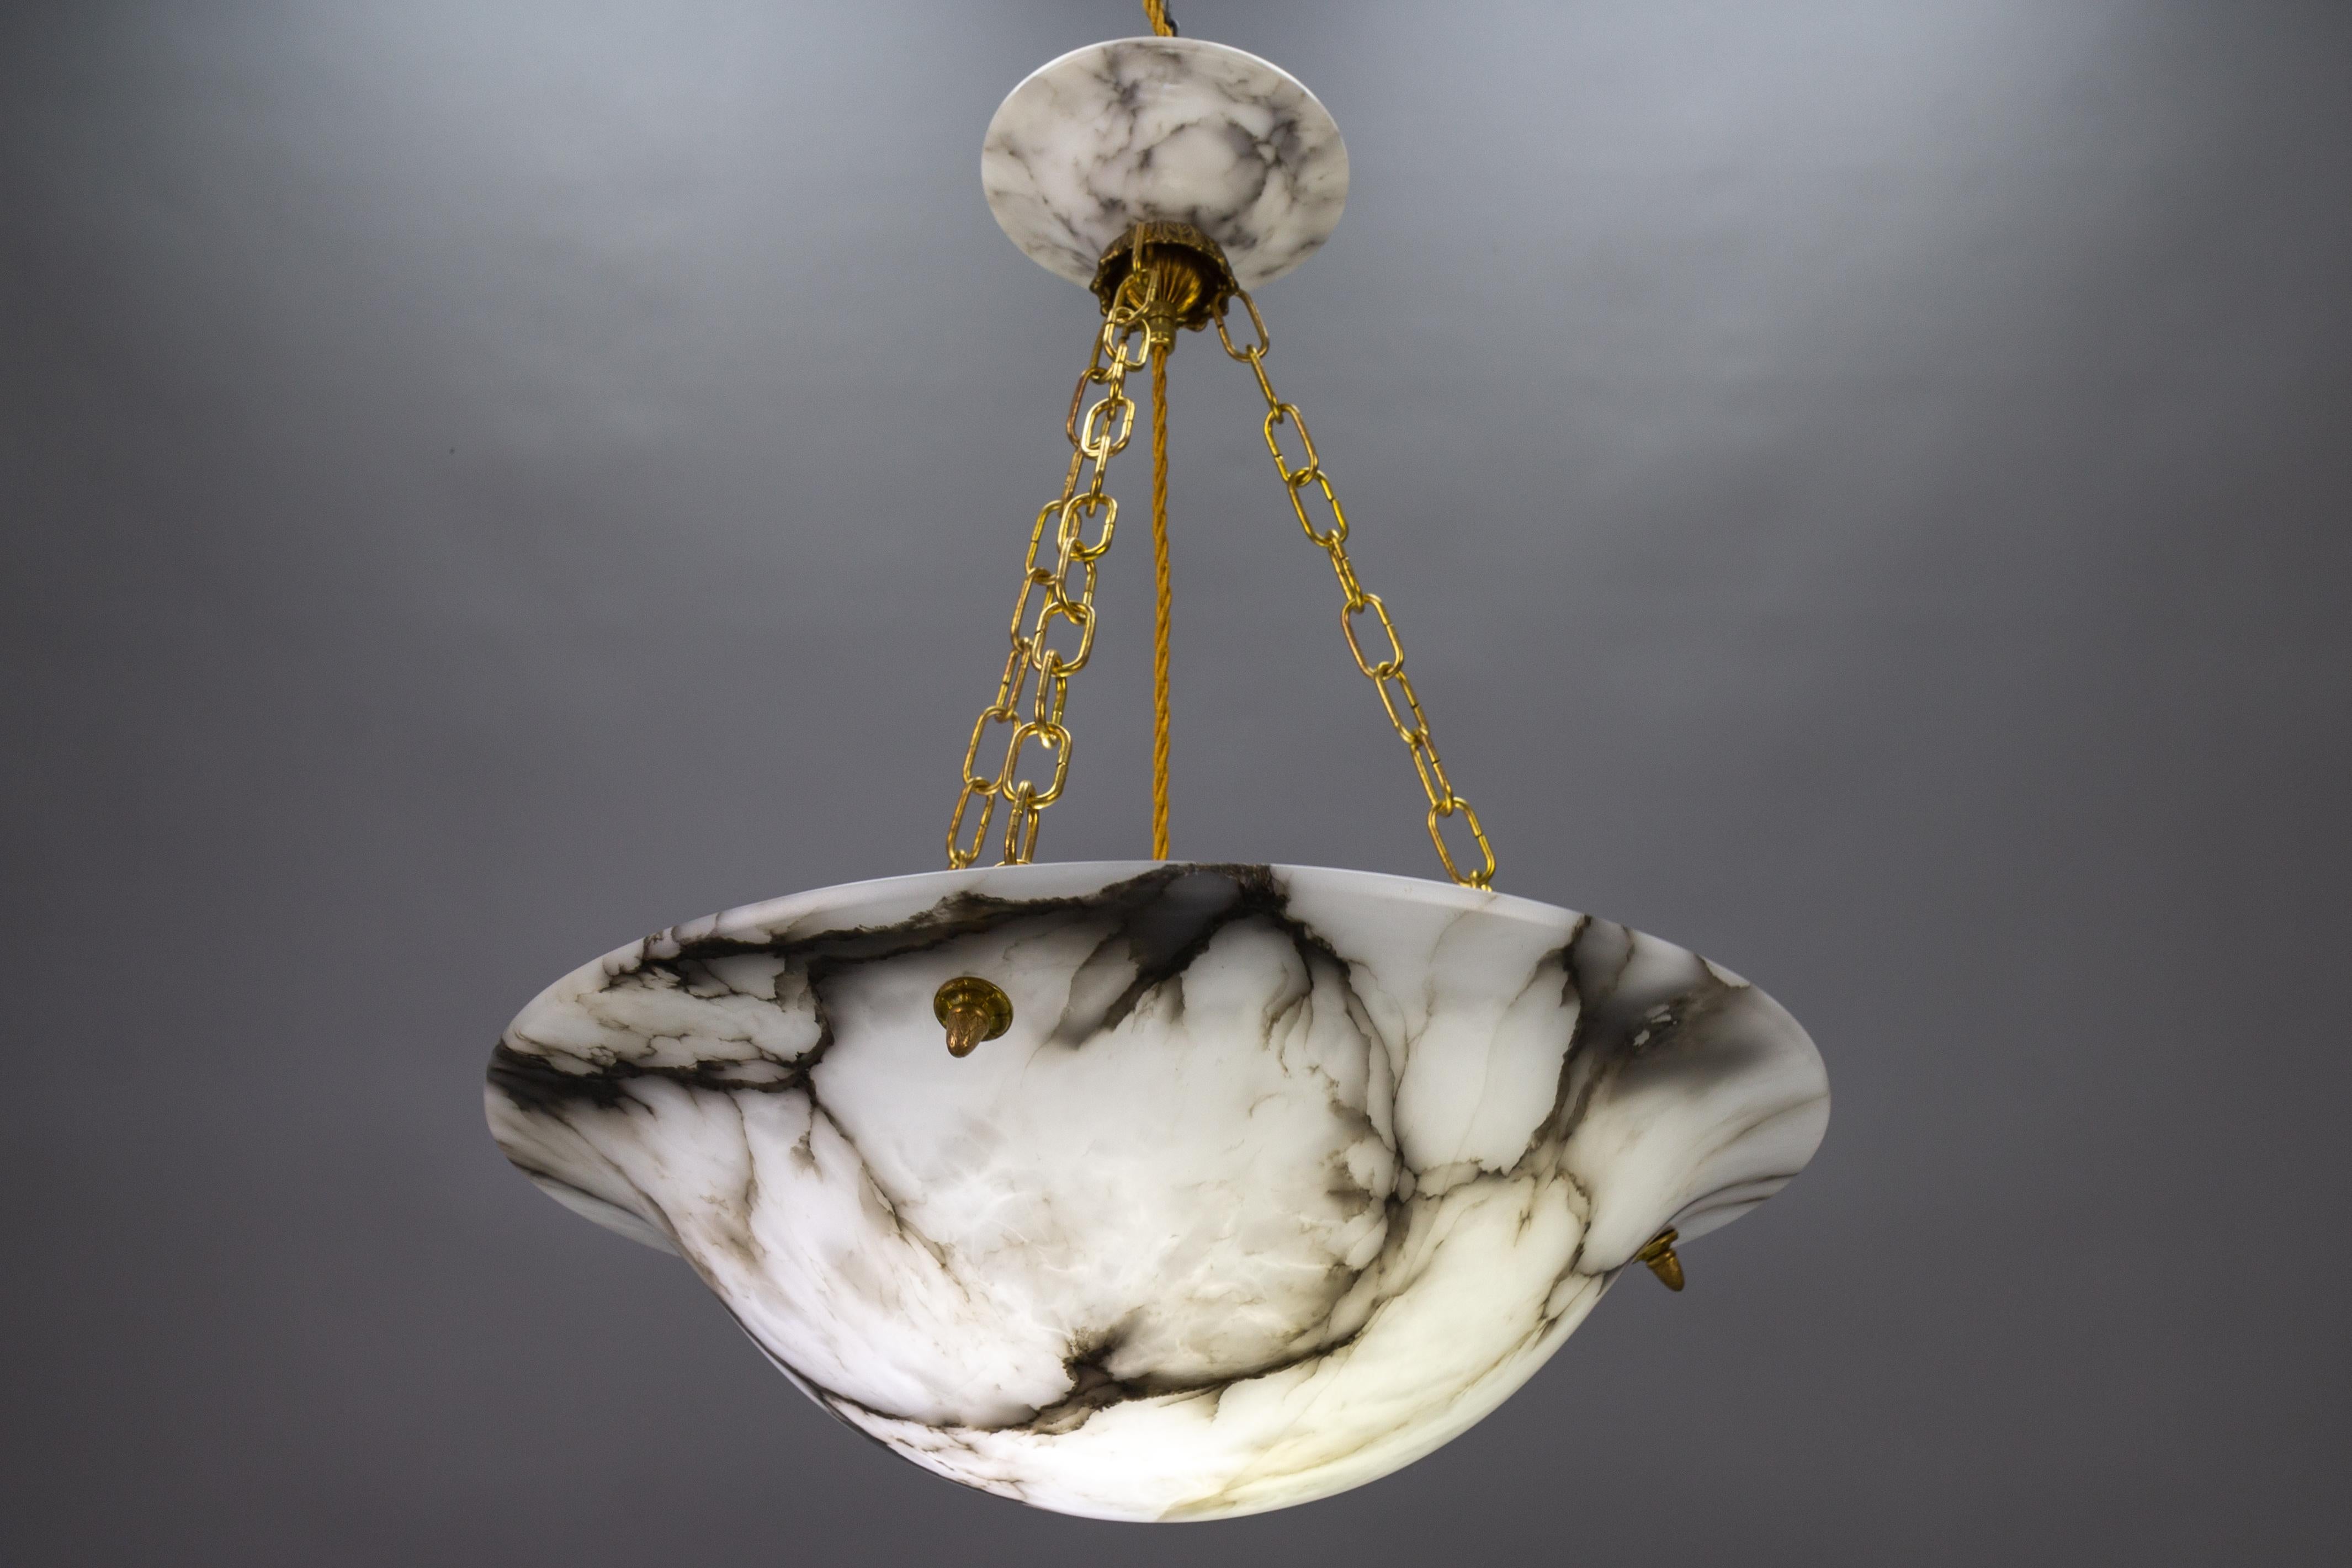 Antique large Art Deco black veined white alabaster pendant light fixture.
Gorgeous and large alabaster pendant ceiling light fixture from circa 1920. Beautifully veined and masterfully carved white alabaster bowl suspended by three brass chains and